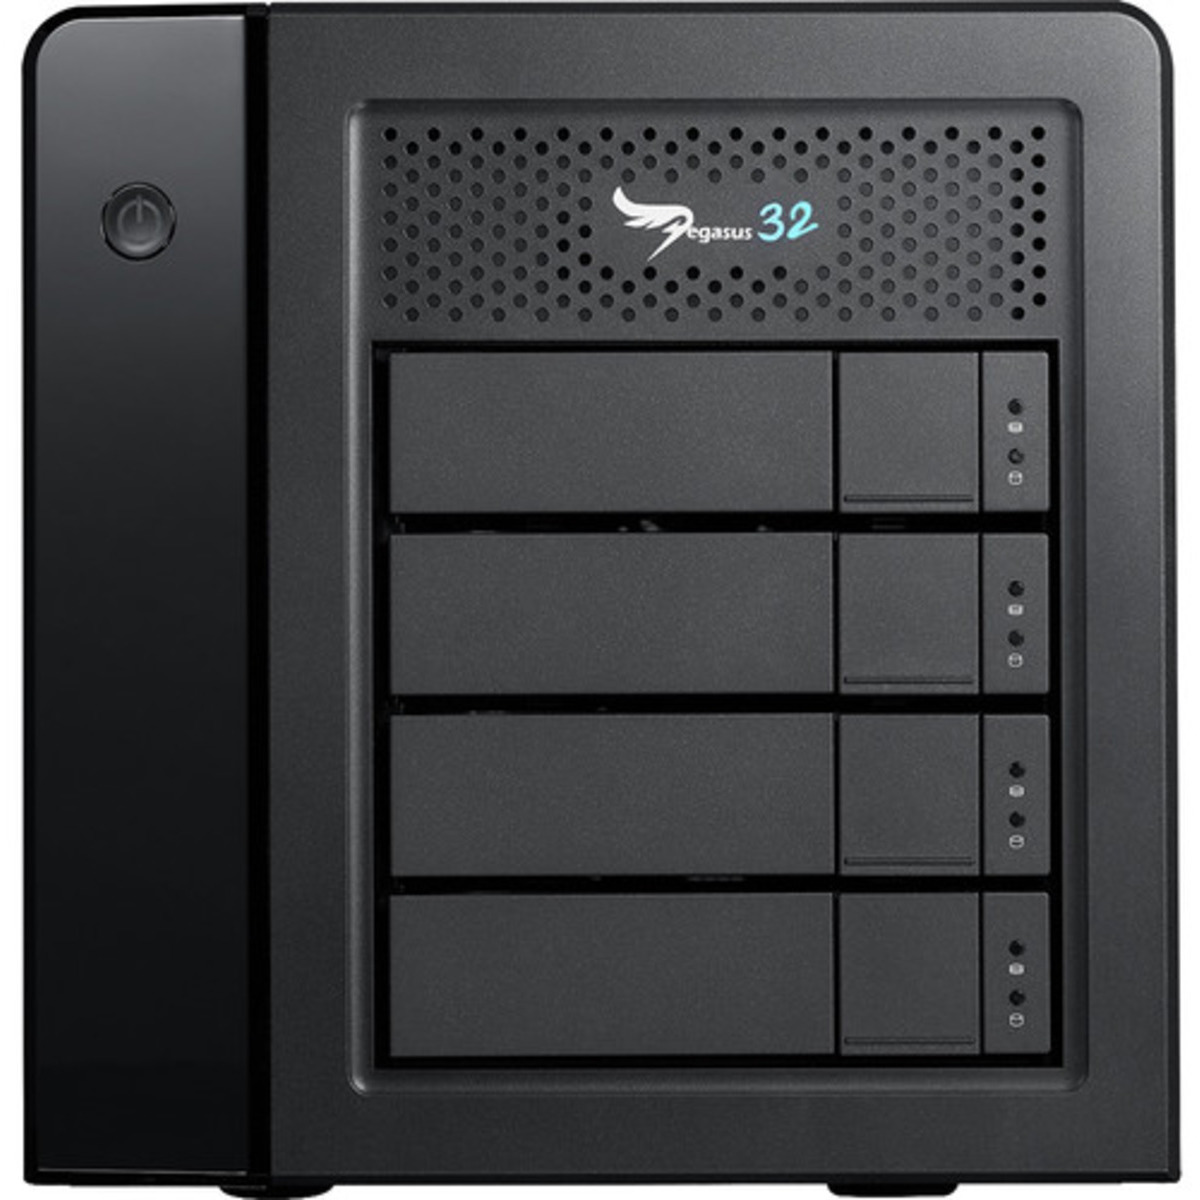 Promise Technology Pegasus32 R4 Thunderbolt 3 64tb 4-Bay Desktop Multimedia / Power User / Business DAS - Direct Attached Storage Device 4x16tb Seagate EXOS X18 ST16000NM000J 3.5 7200rpm SATA 6Gb/s HDD ENTERPRISE Class Drives Installed - Burn-In Tested Pegasus32 R4 Thunderbolt 3